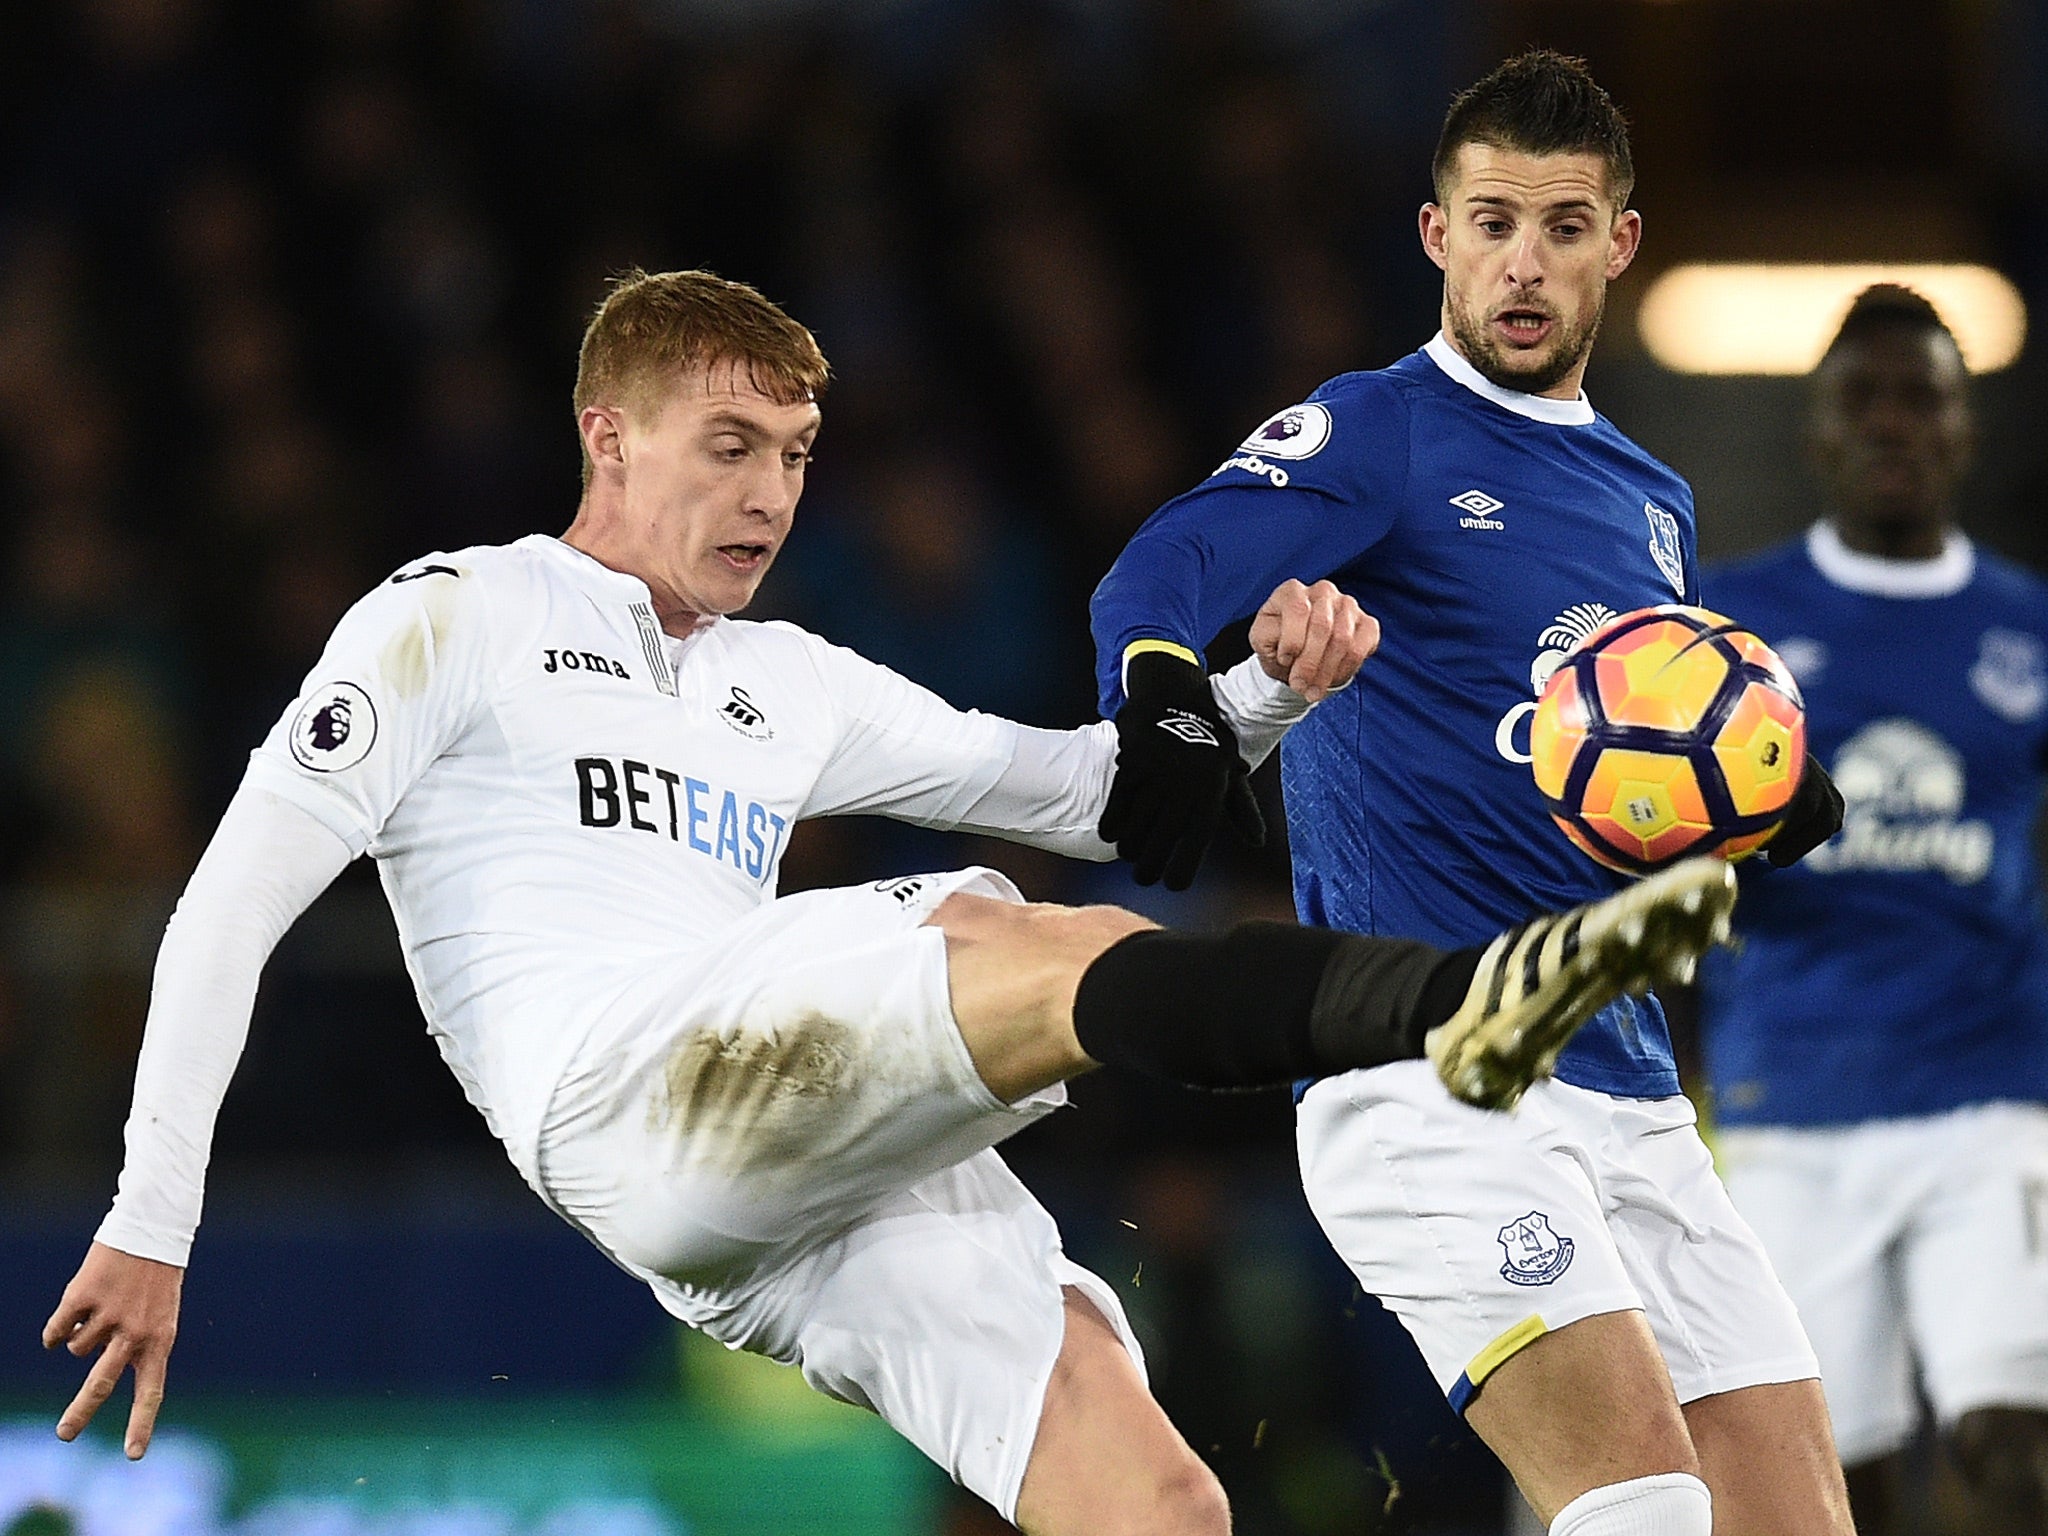 Everton were held by Swansea at Goodison Park earlier this season